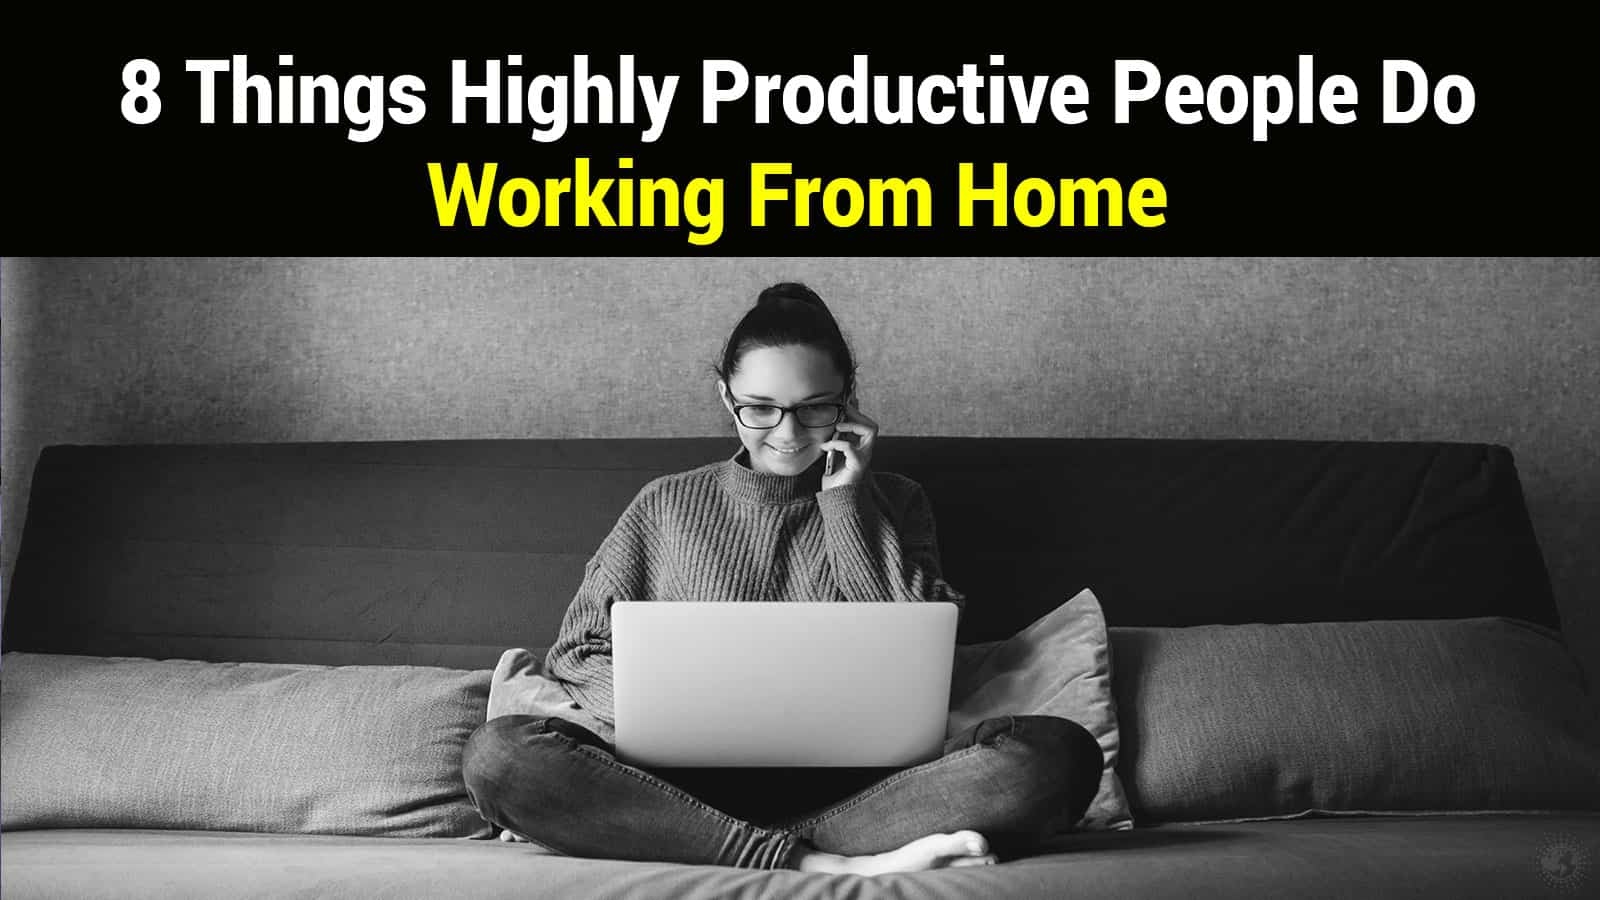 8 Things Highly Productive People Do Working From Home